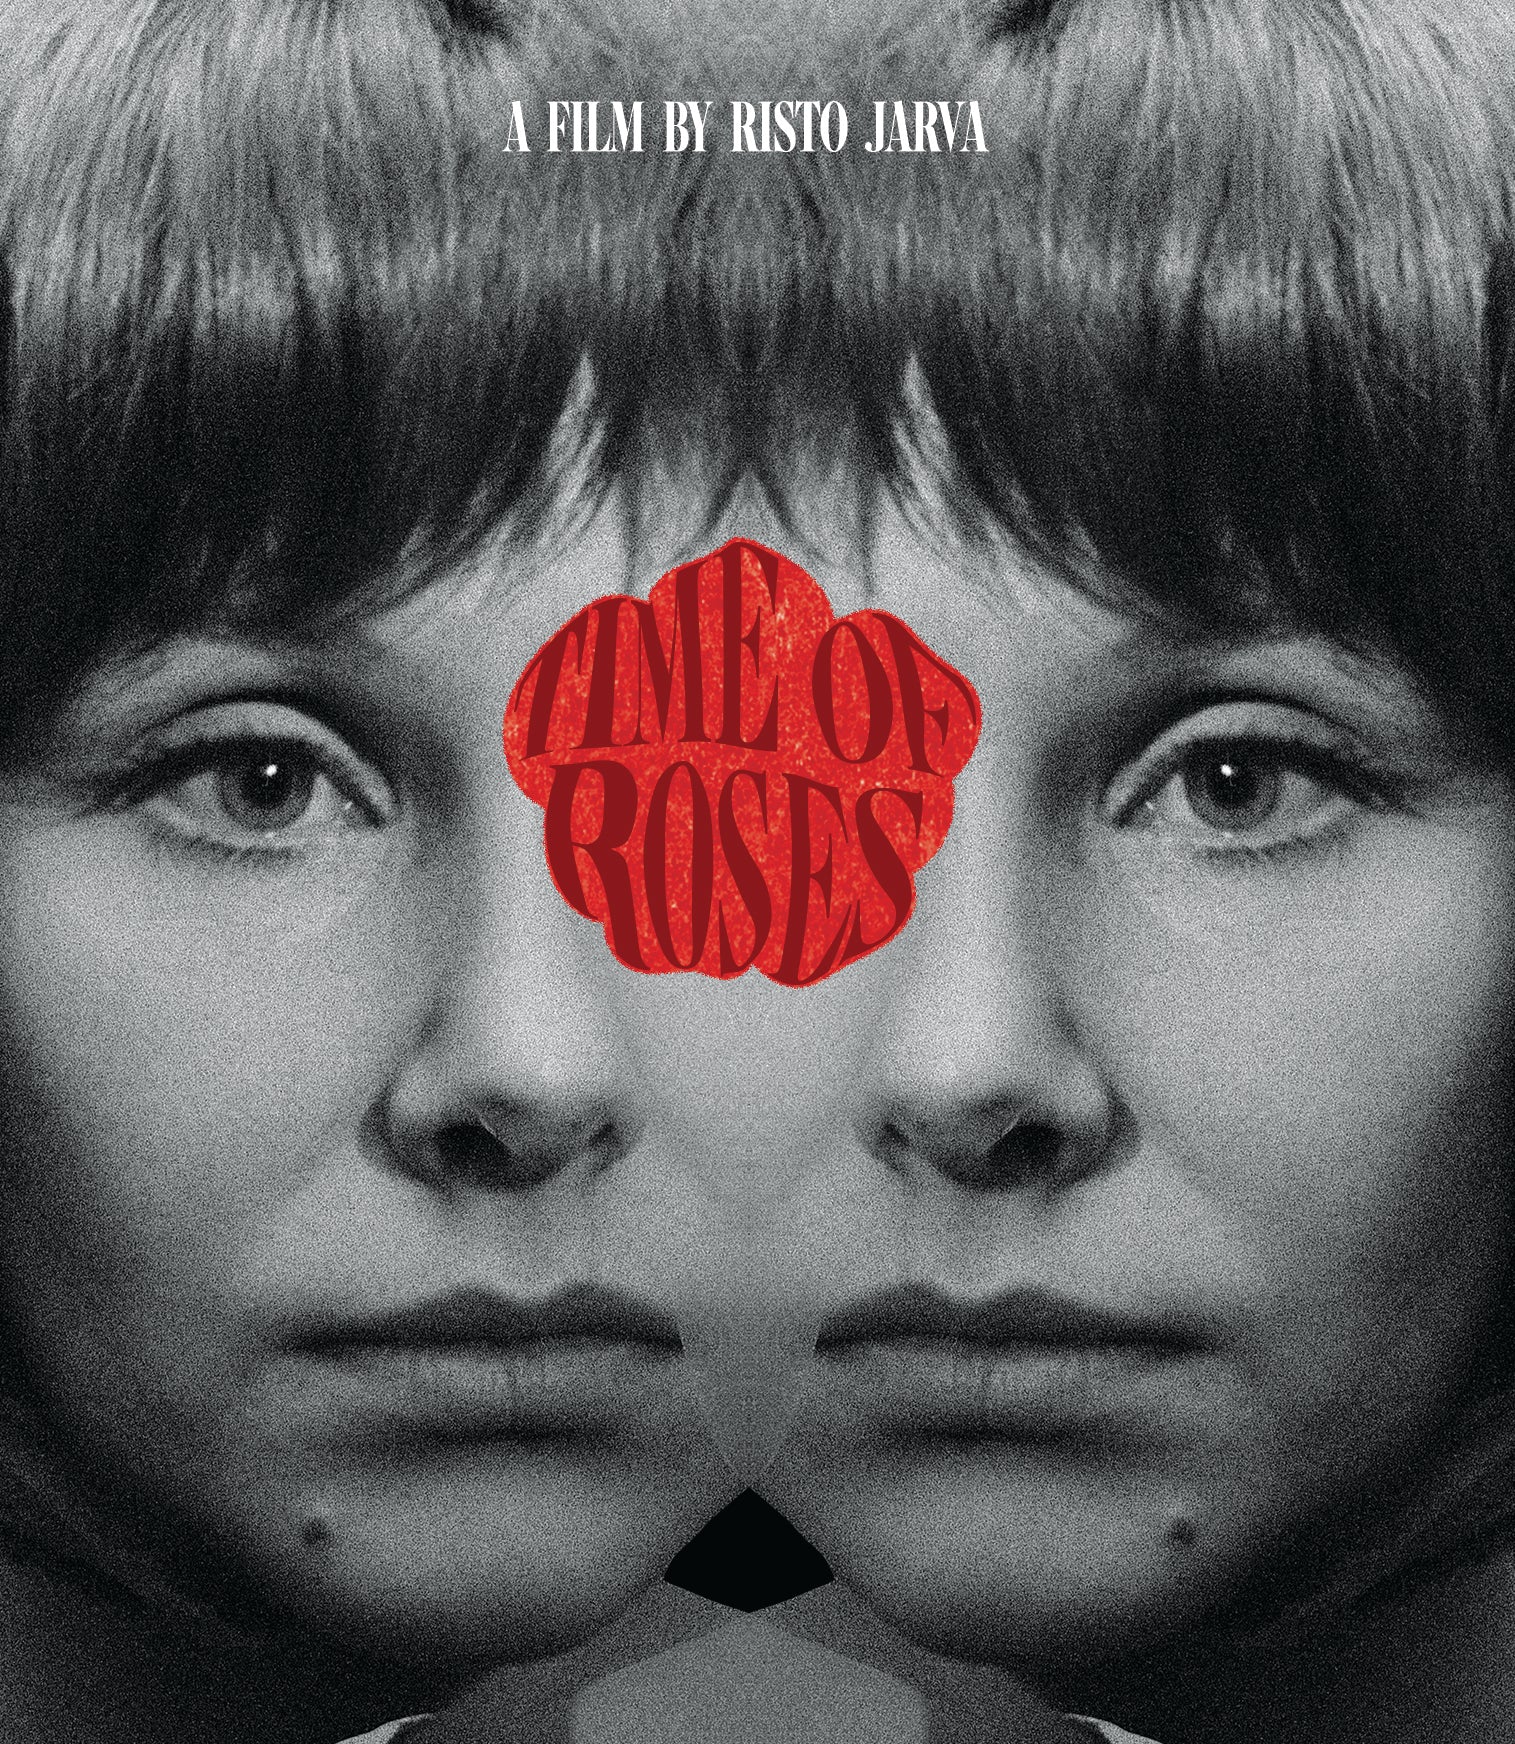 TIME OF ROSES (LIMITED EDITION) BLU-RAY